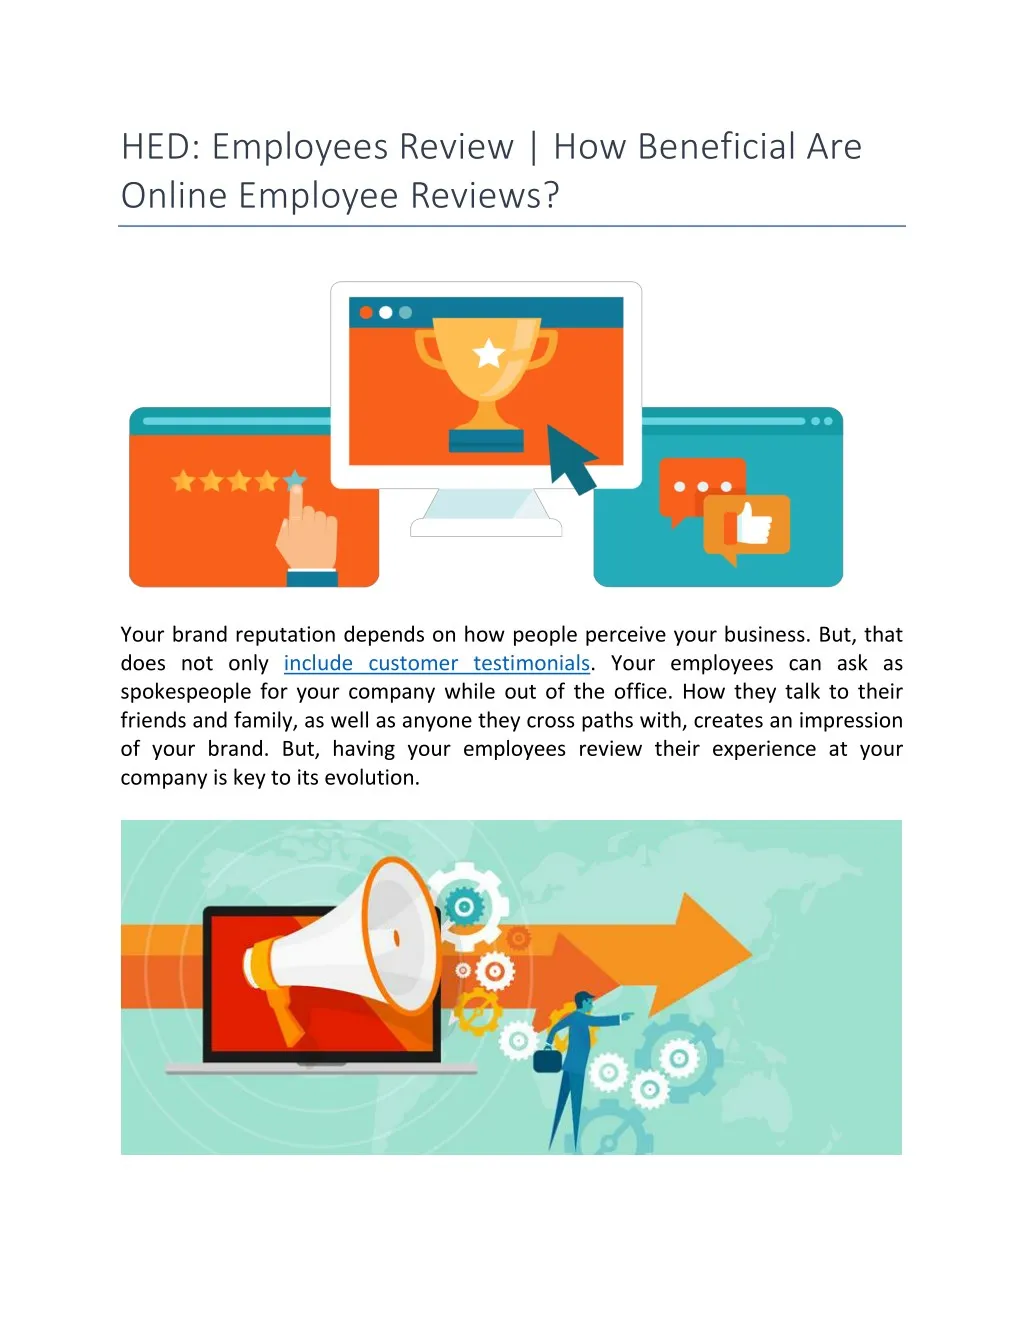 hed employees review how beneficial are online